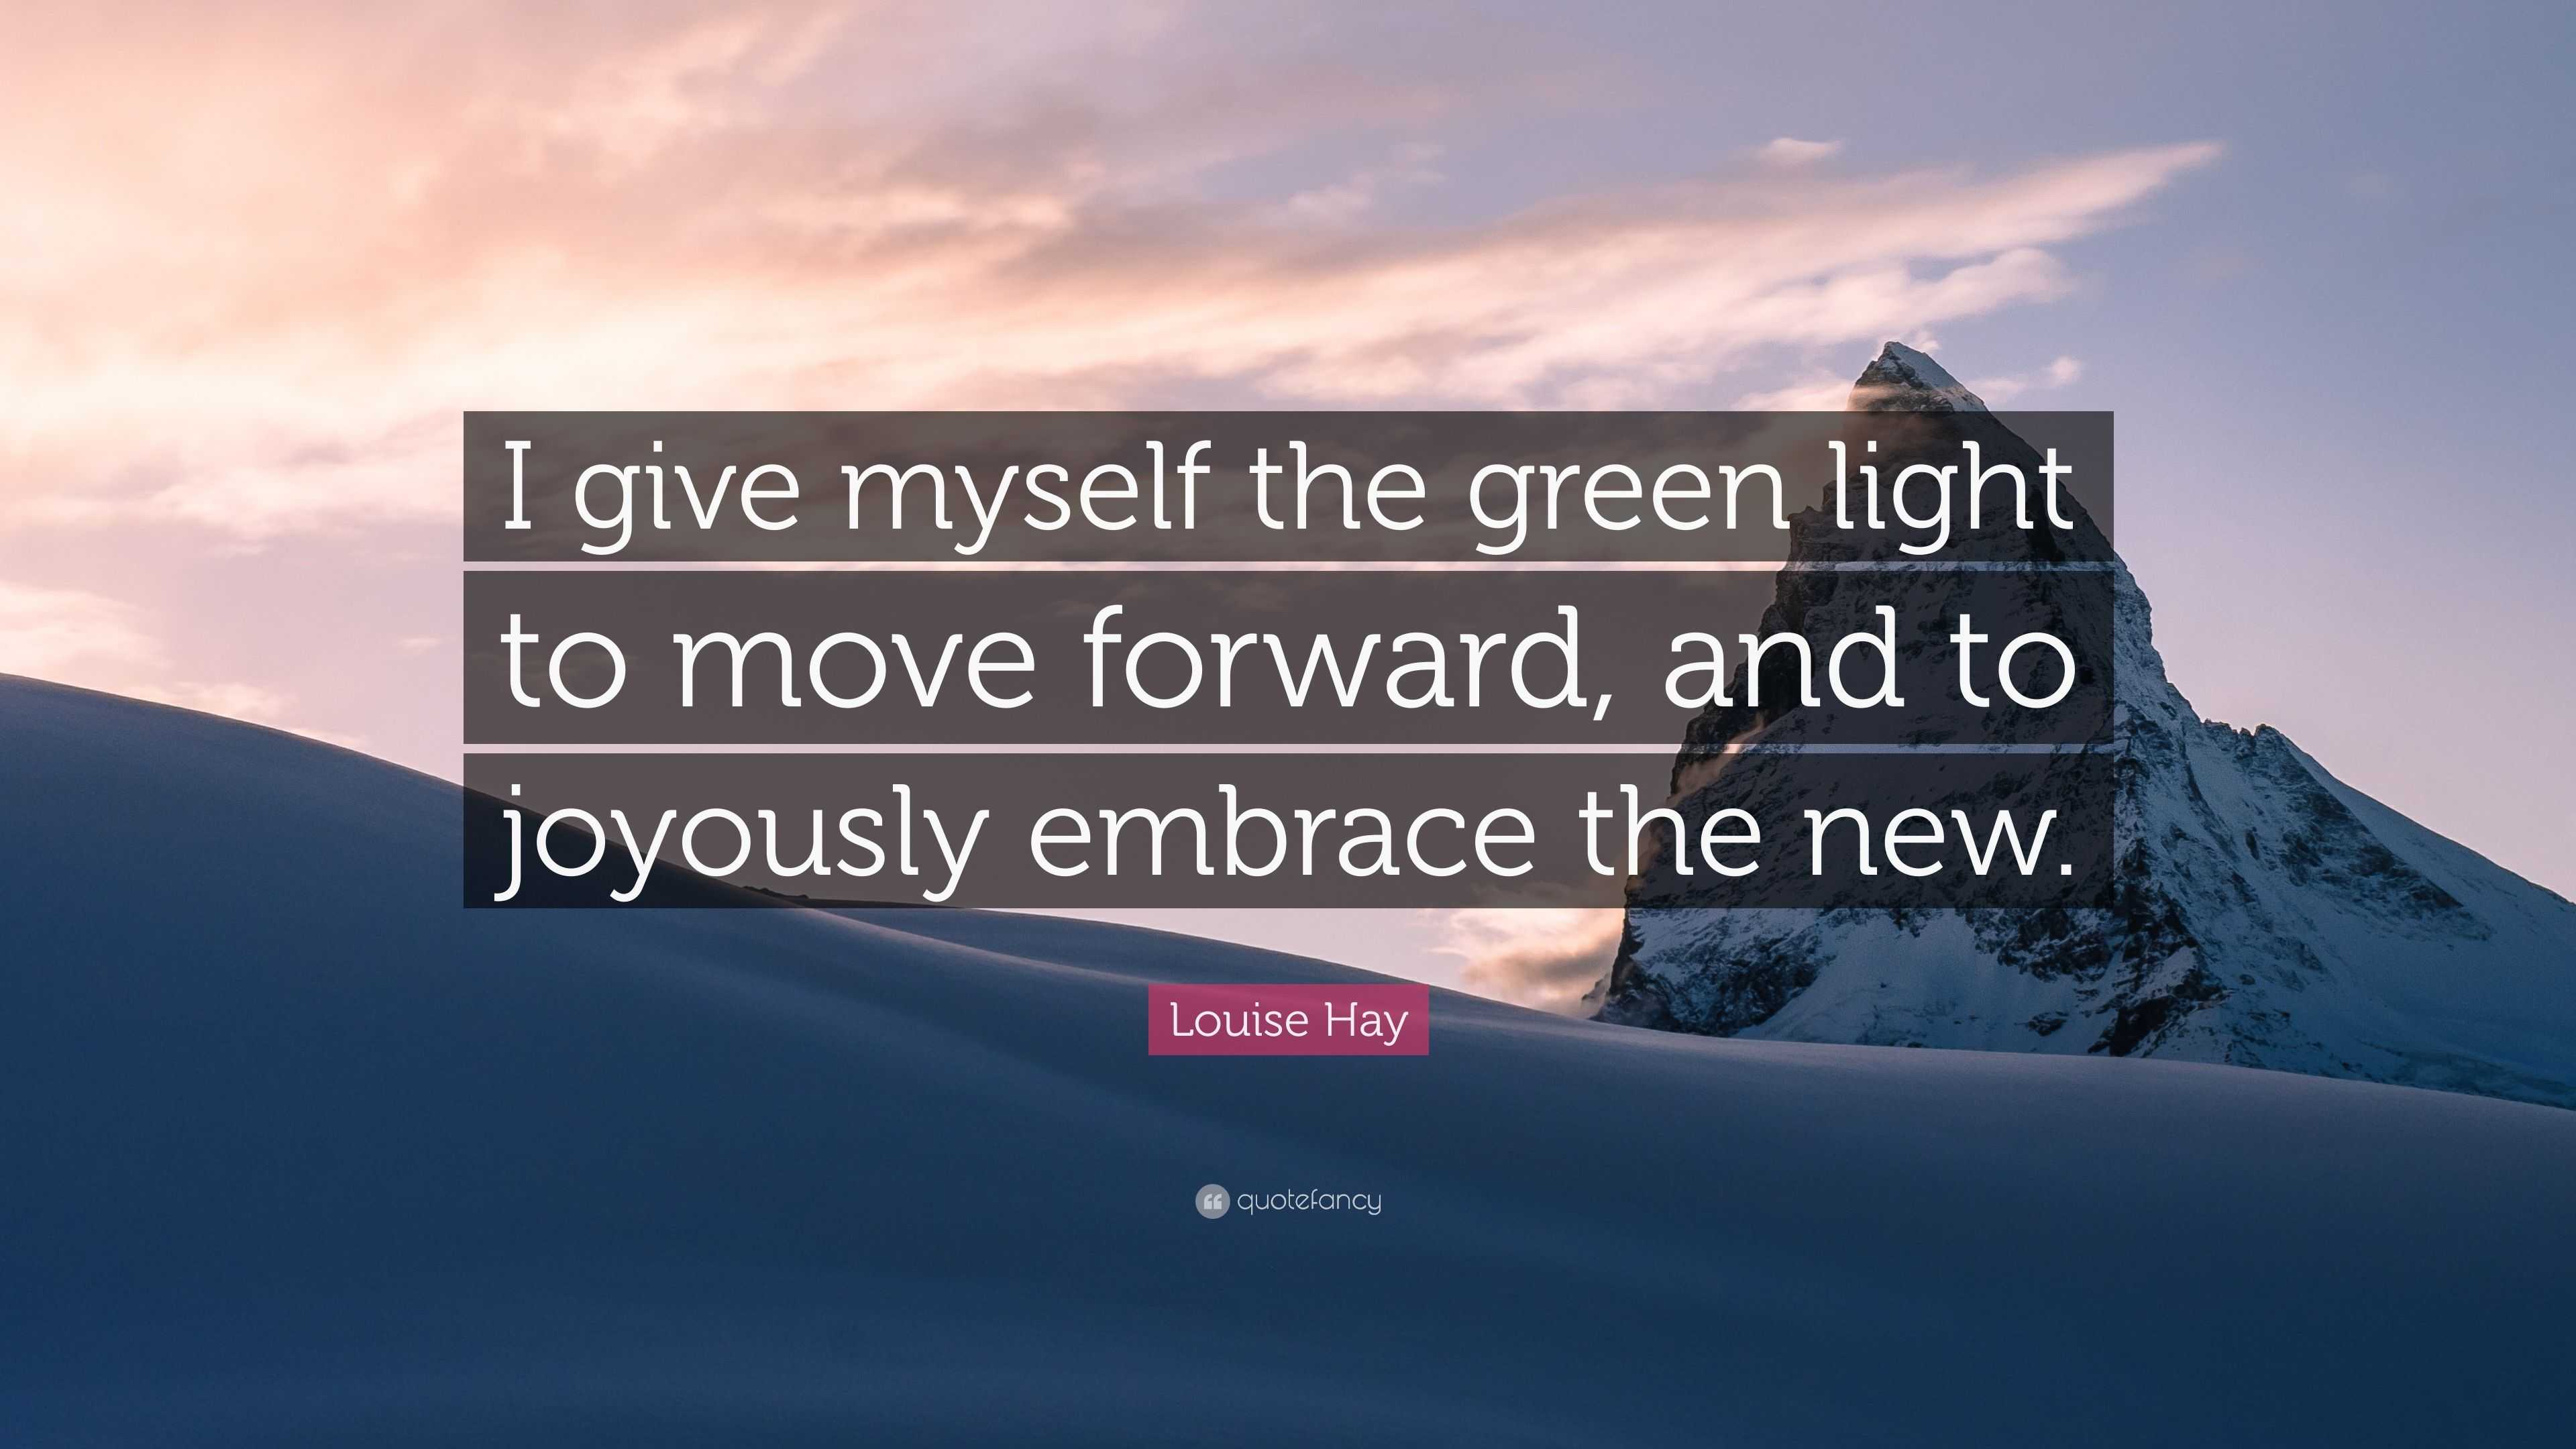 Quote: “I give myself green light to move and to joyously embrace